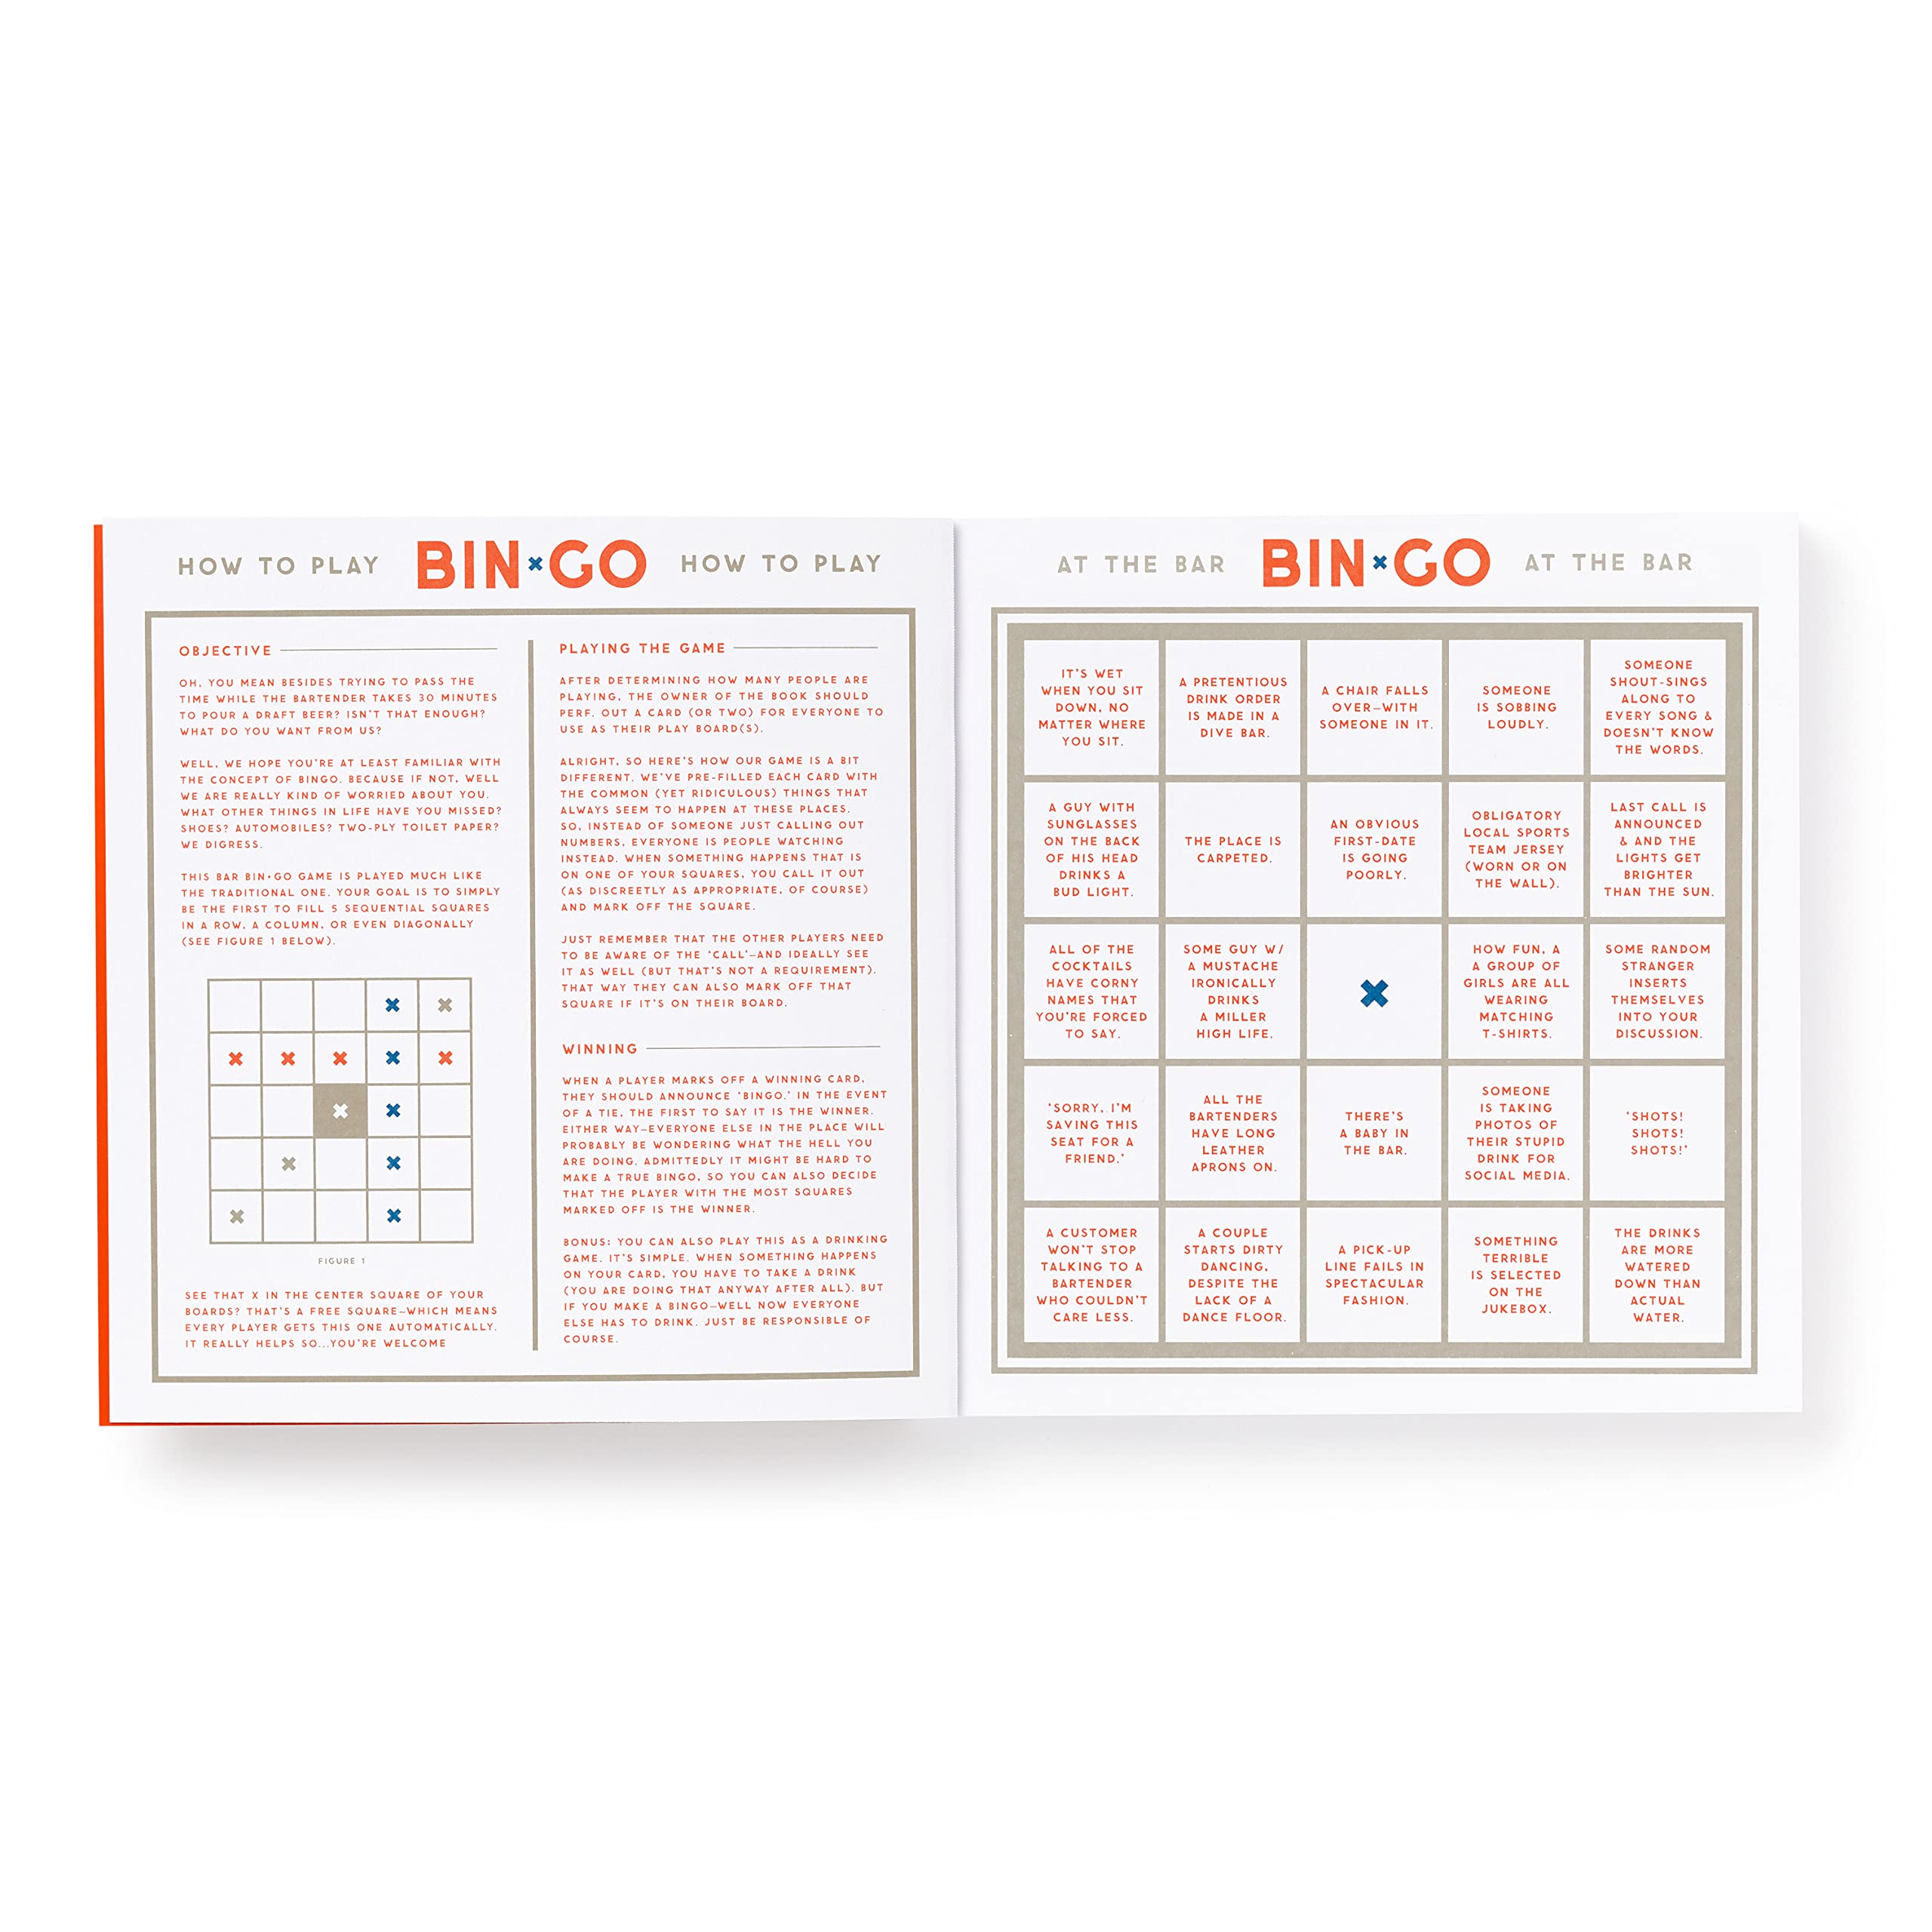 Brass Monkey Bin-go Get A Few Drinks – Game Book with Perforated People-Watching Bingo Cards for Bars and Restaurants